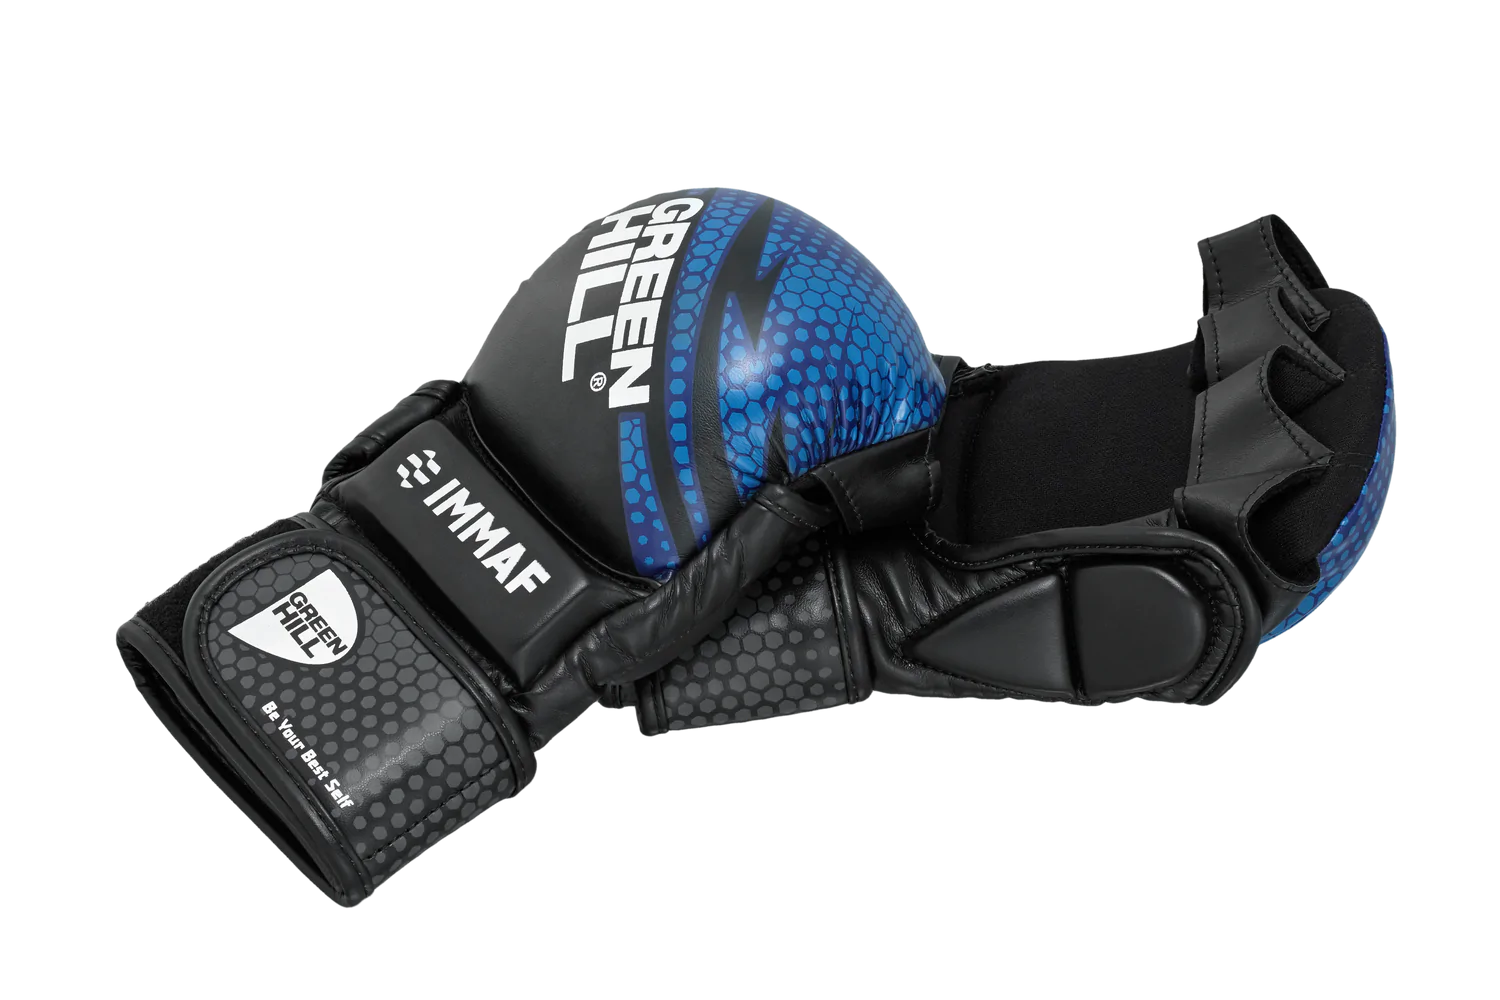 GREEN HILL IMMAF APPROVED MMA GLOVES BLUE